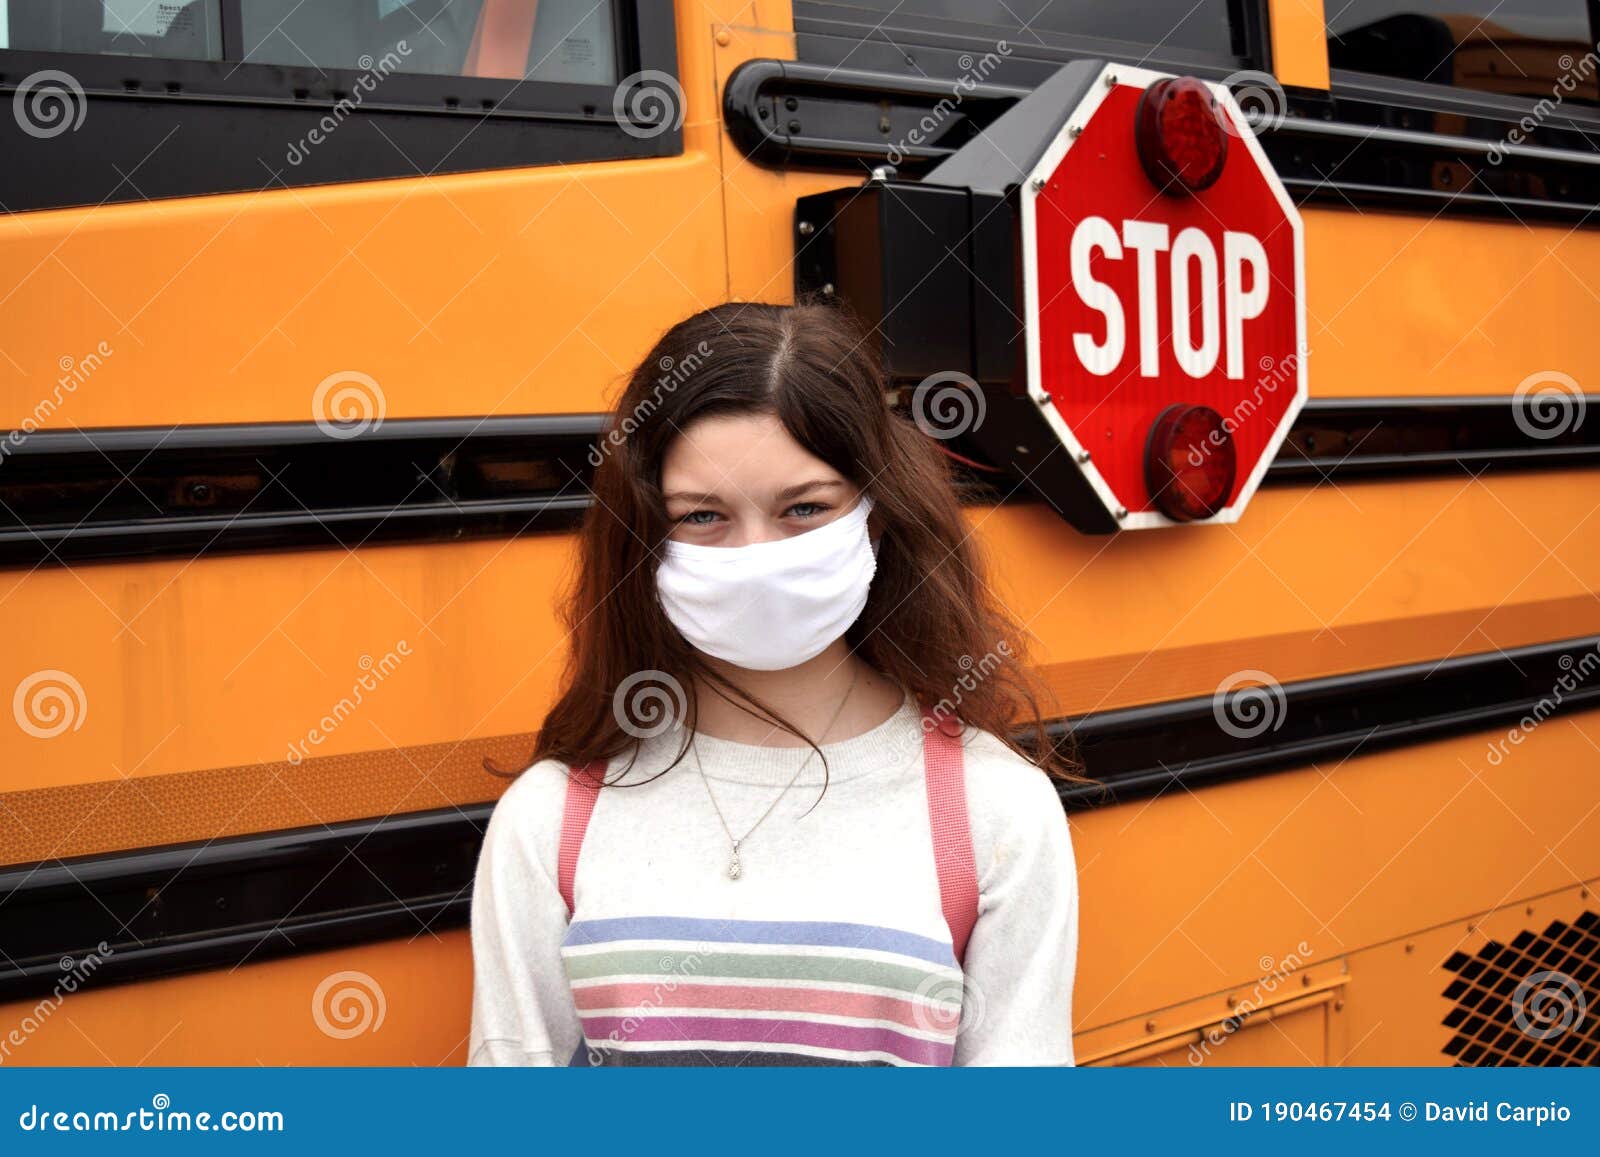 coronavirus school reopening concept: girl with face mask by school bus